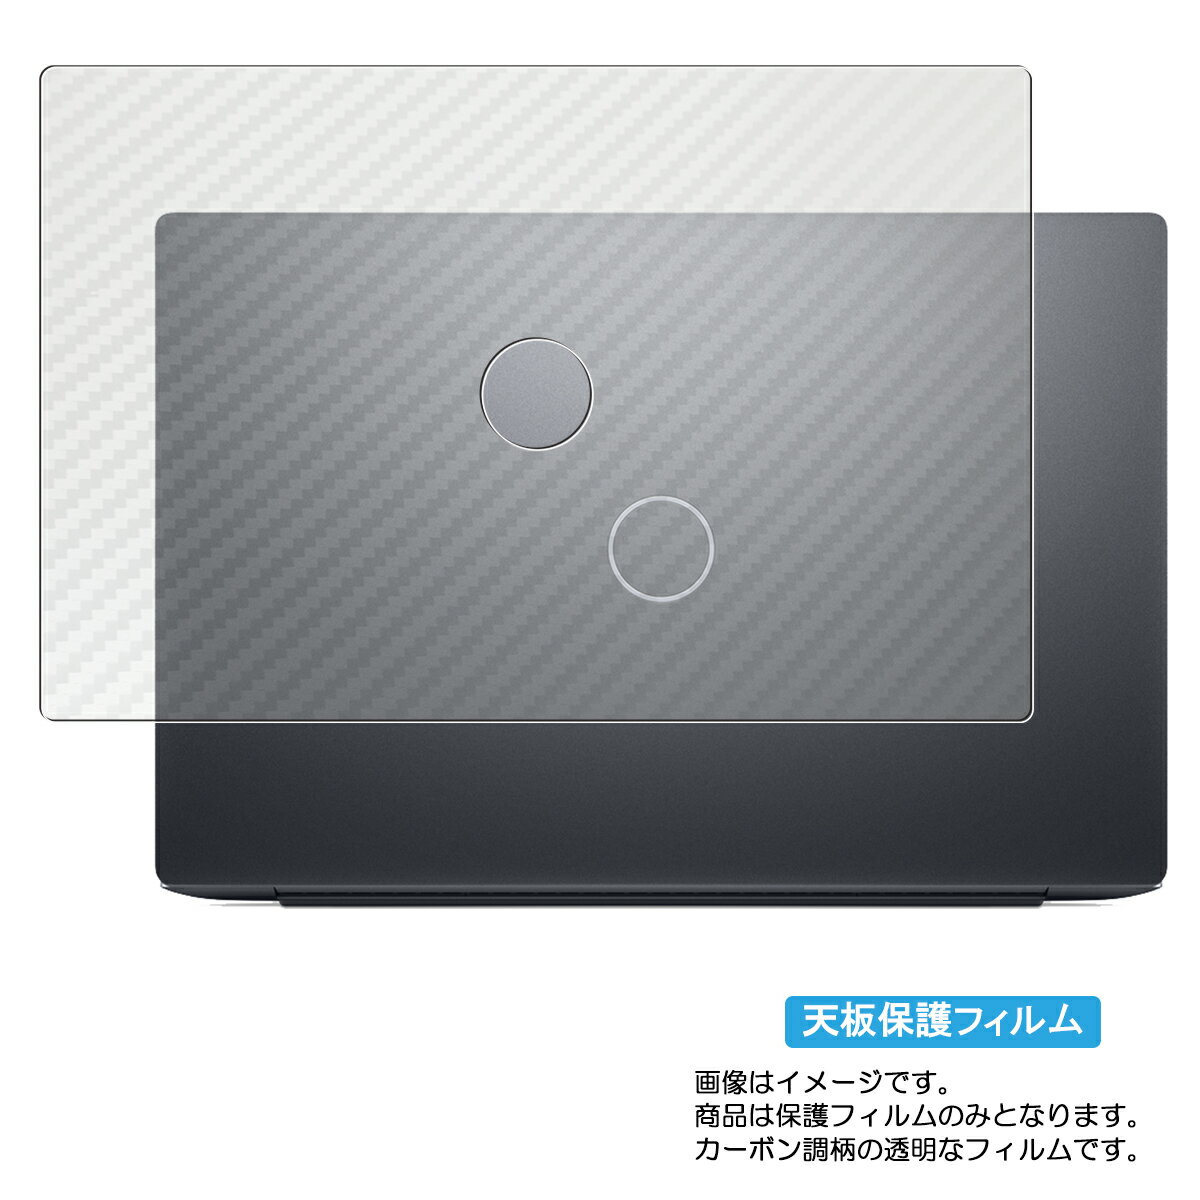 Dell XPS 13 9315 / XPS 13 Plus 9320 2022/23年モデル 用 N30 カーボン調 クリア 天板 保護 フィルム ★ デル